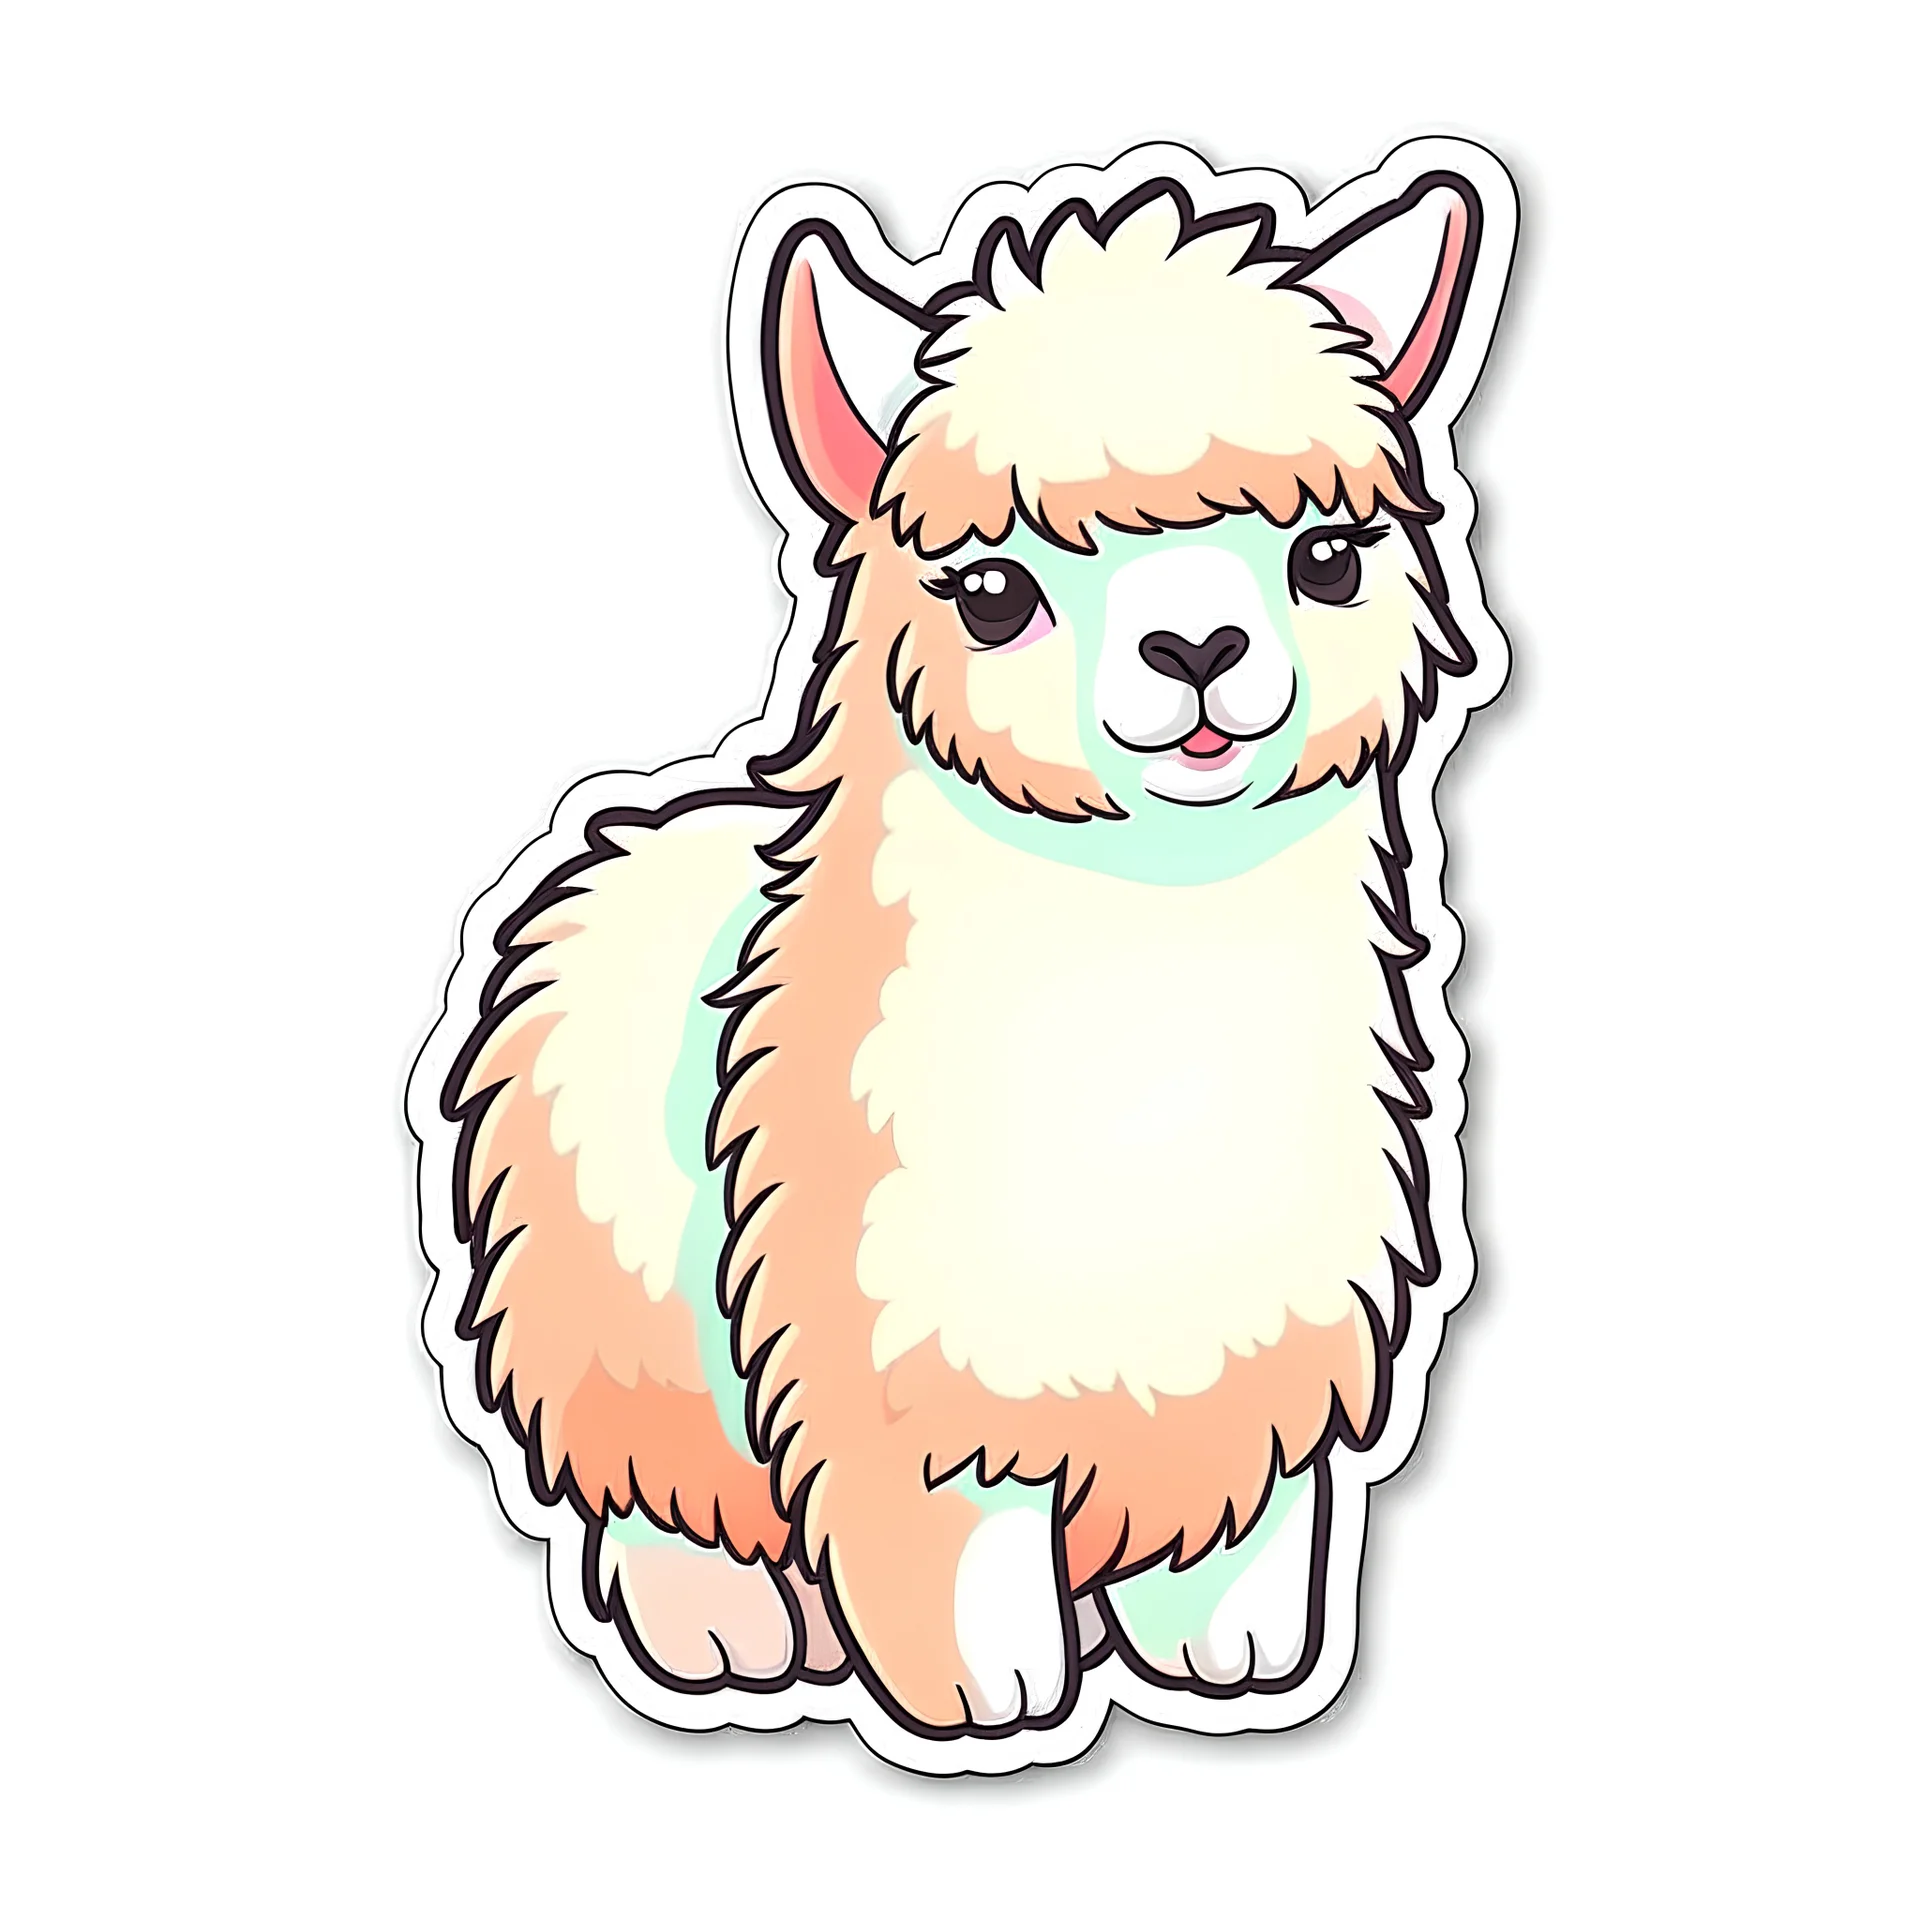 An endearing alpaca sticker with a thick, fluffy coat and large, soulful eyes in pastel colors sticker on white background.